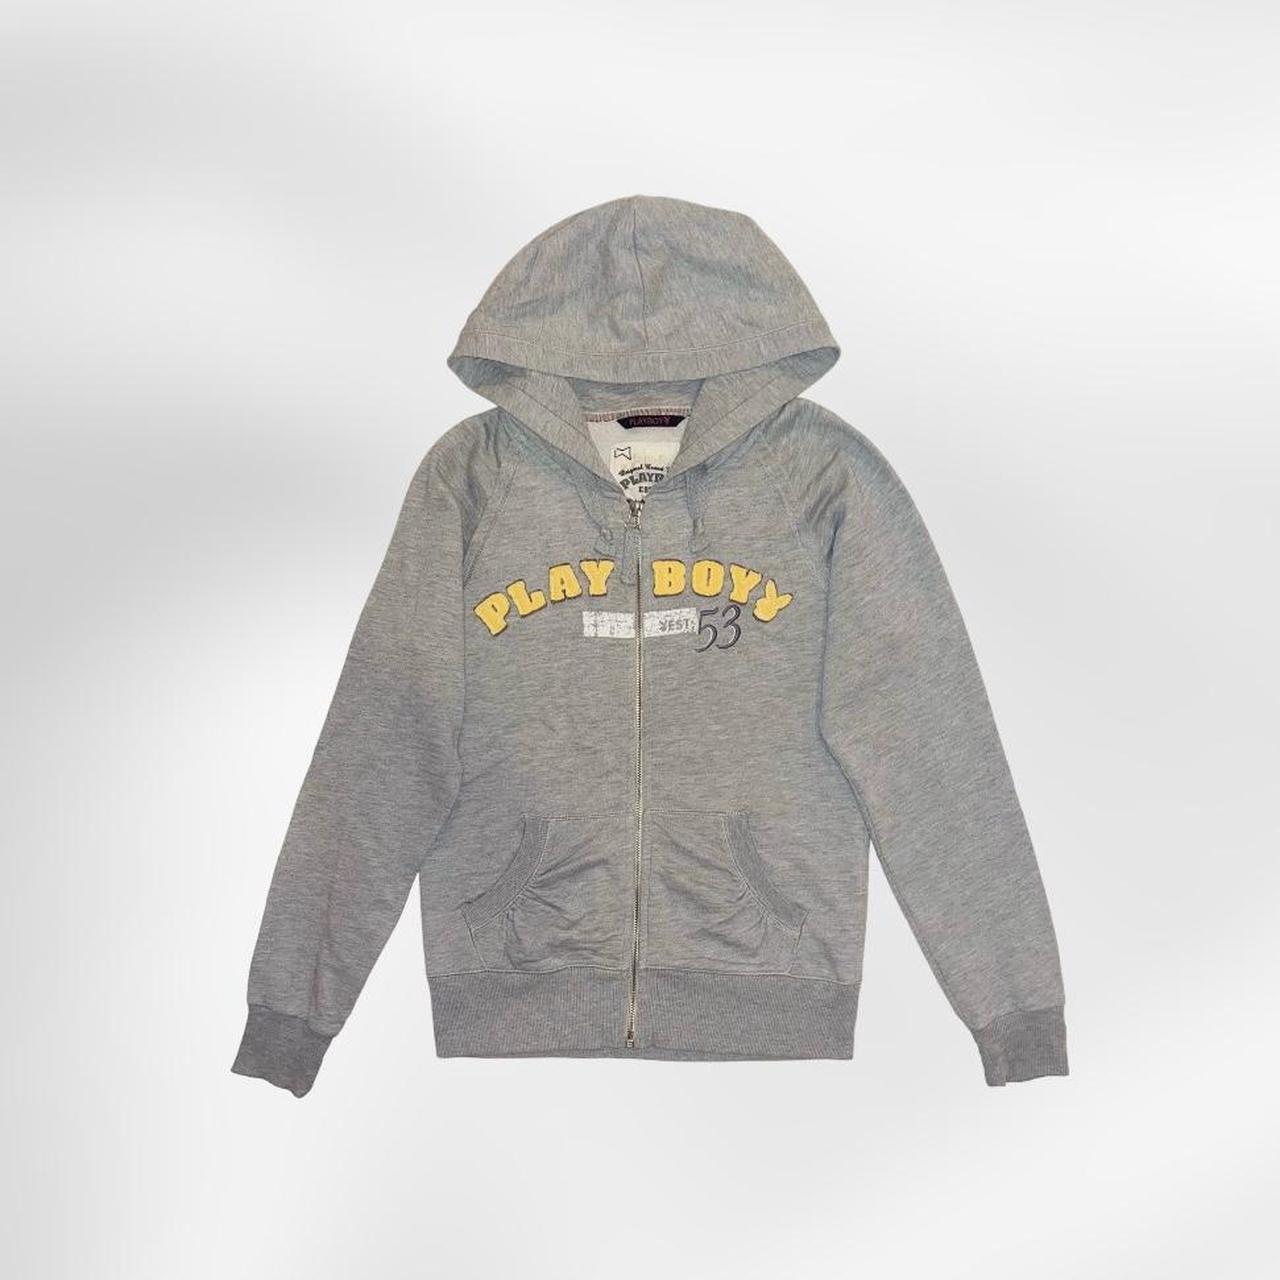 Playboy hoodie. Grey with yellow spell out text... - Depop